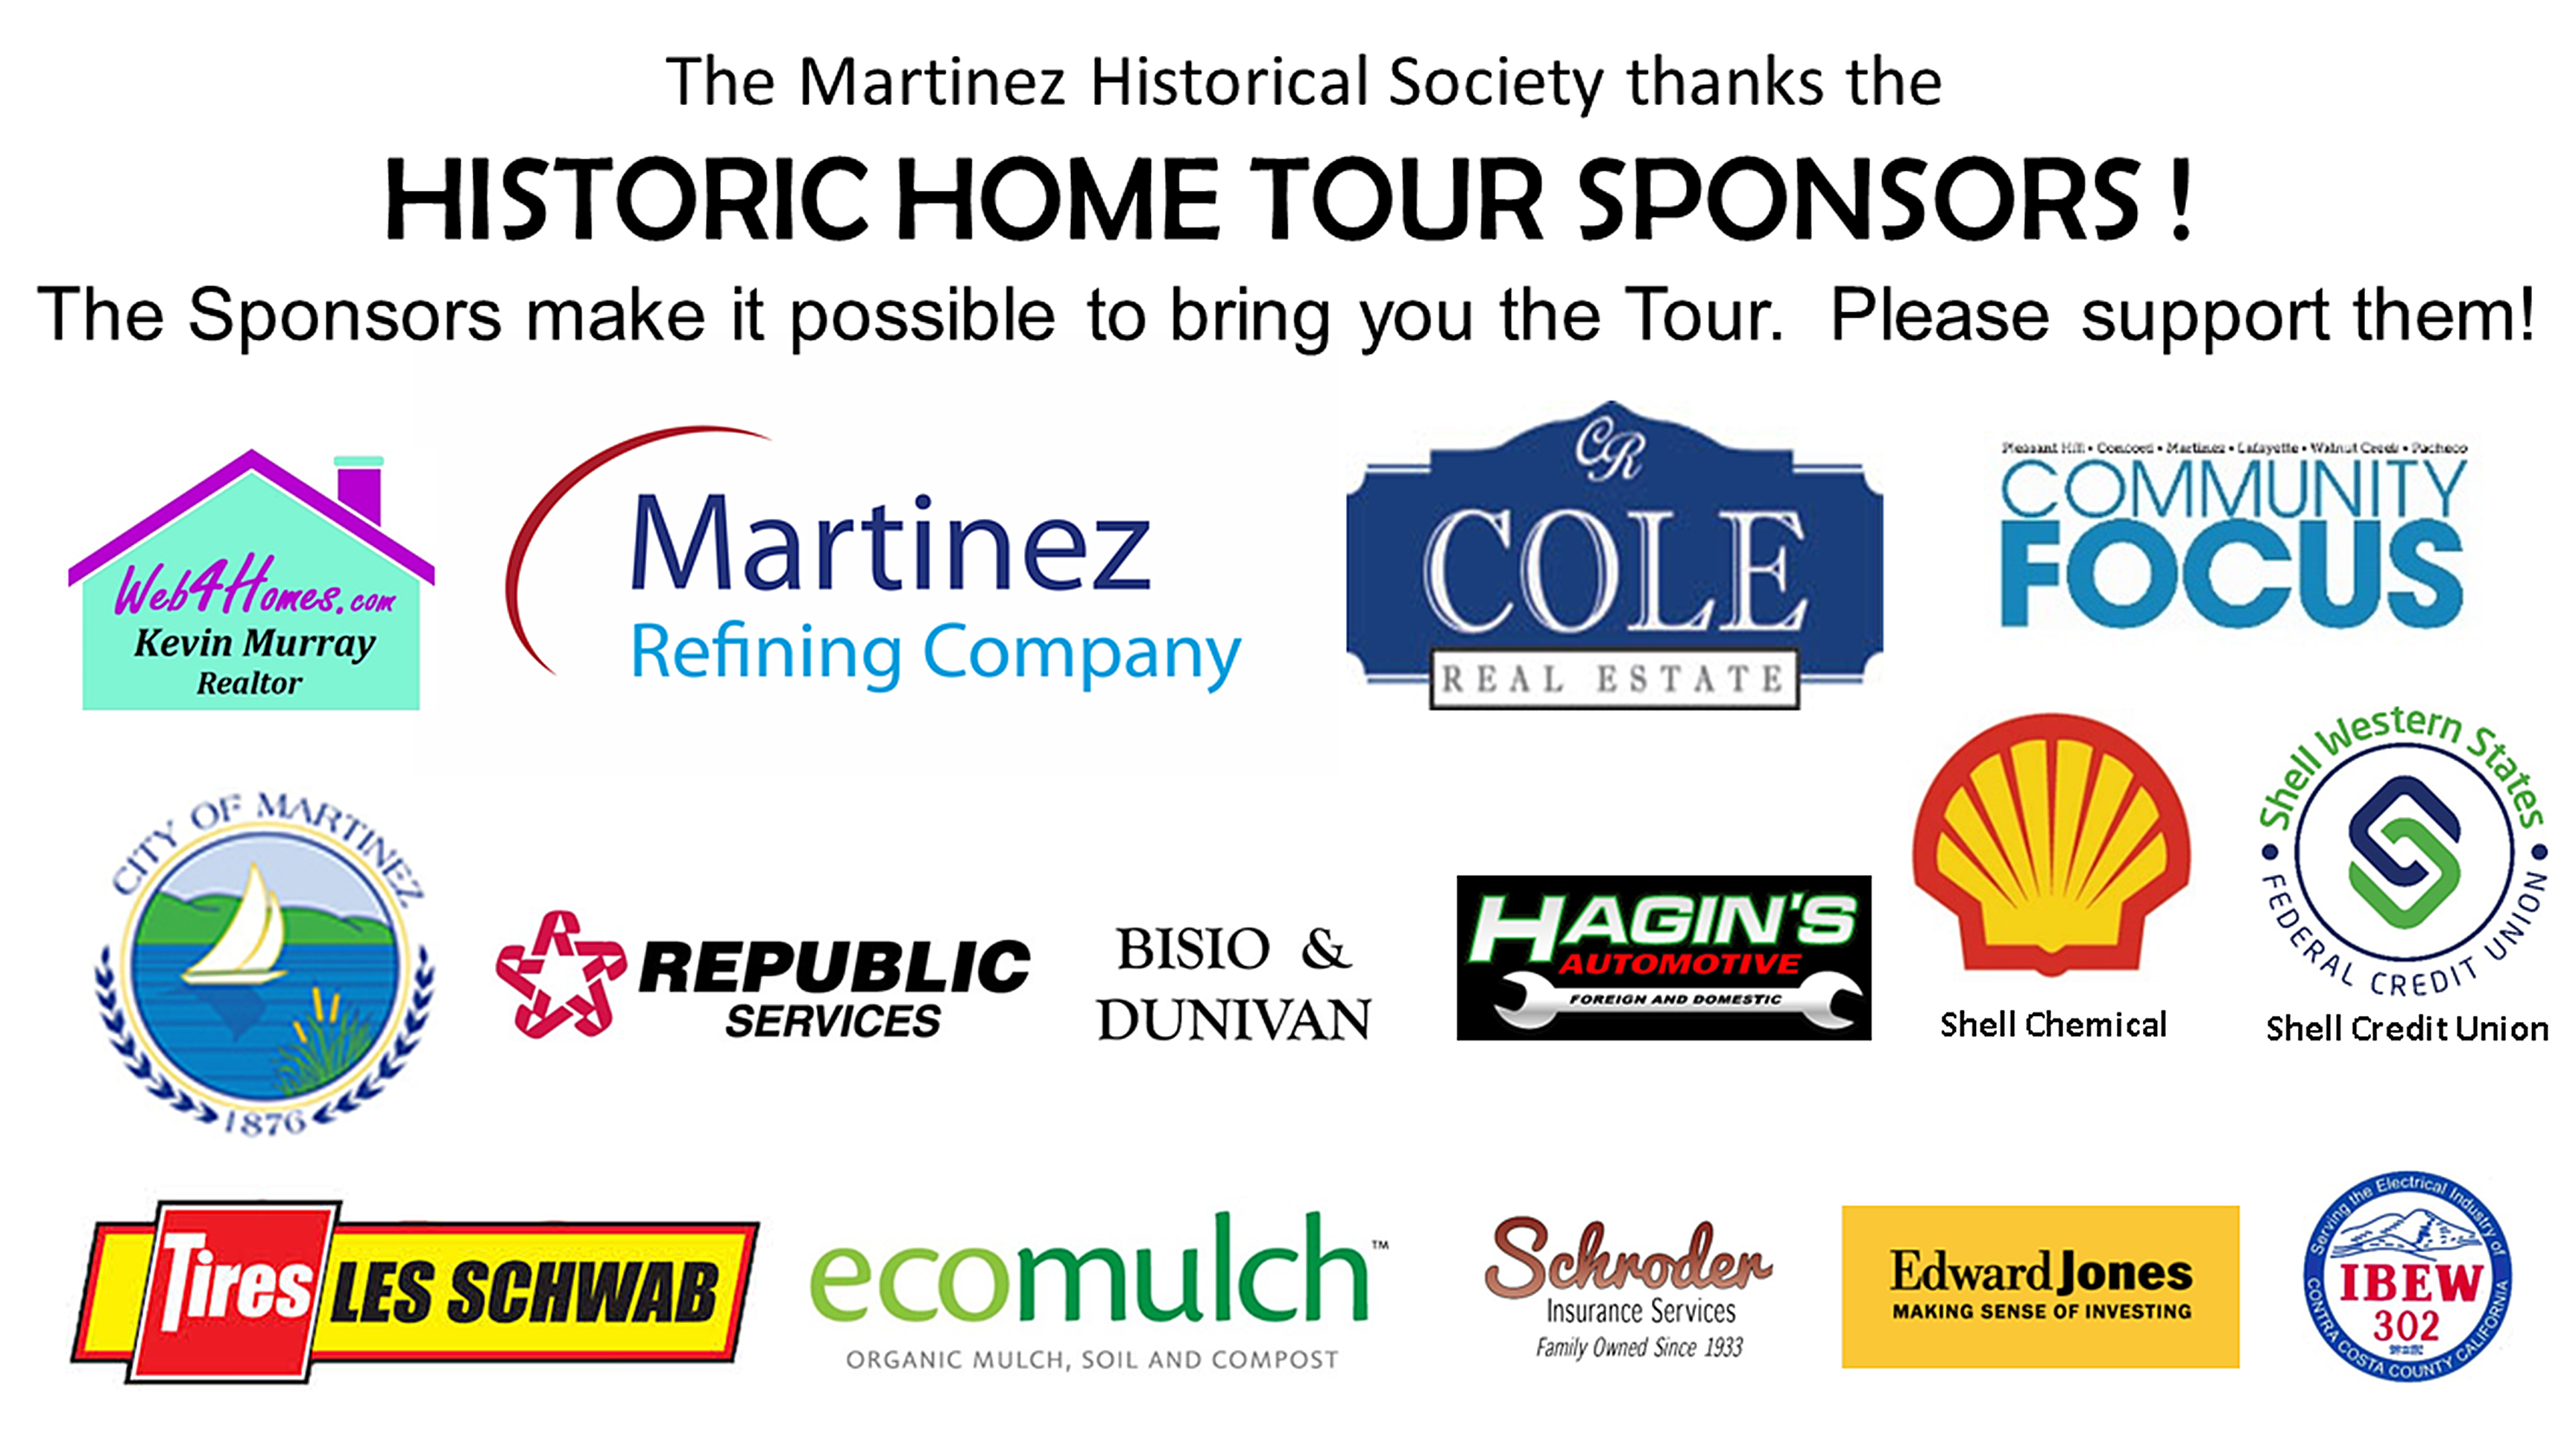 The Martinez Historical Society thanks the sponsors of the Historic Home Tour for their support!